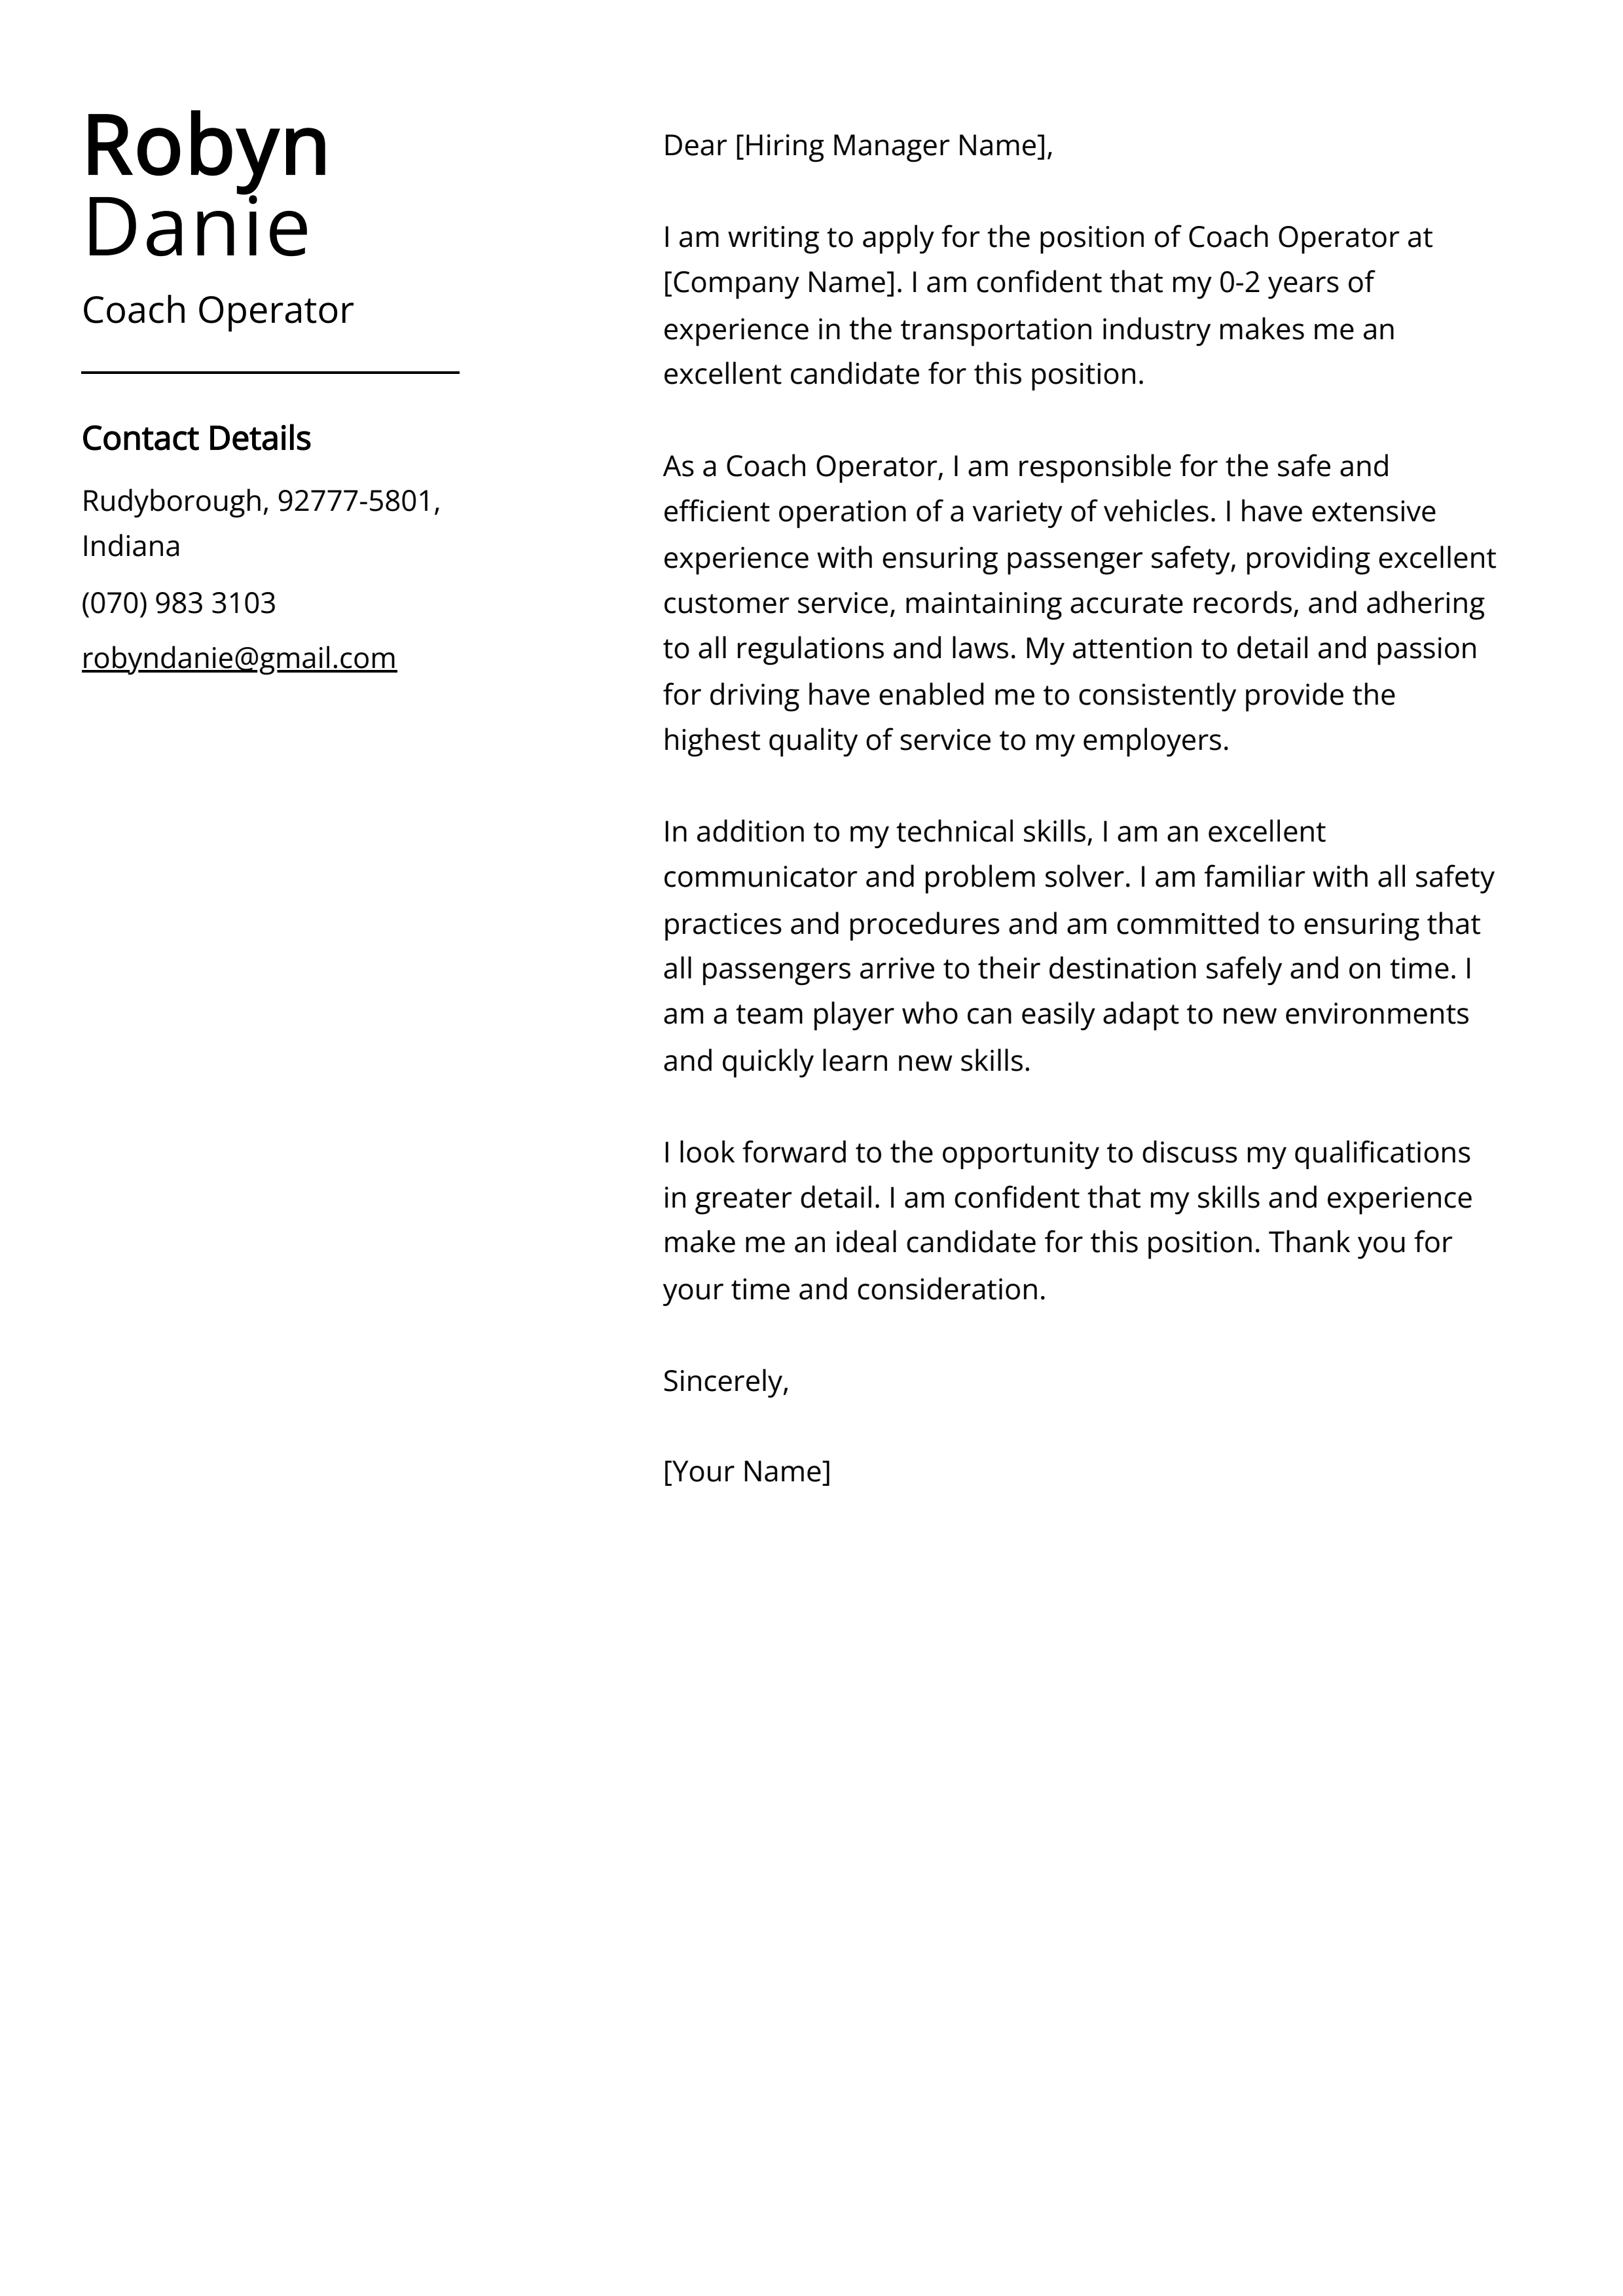 Coach Operator Cover Letter Example